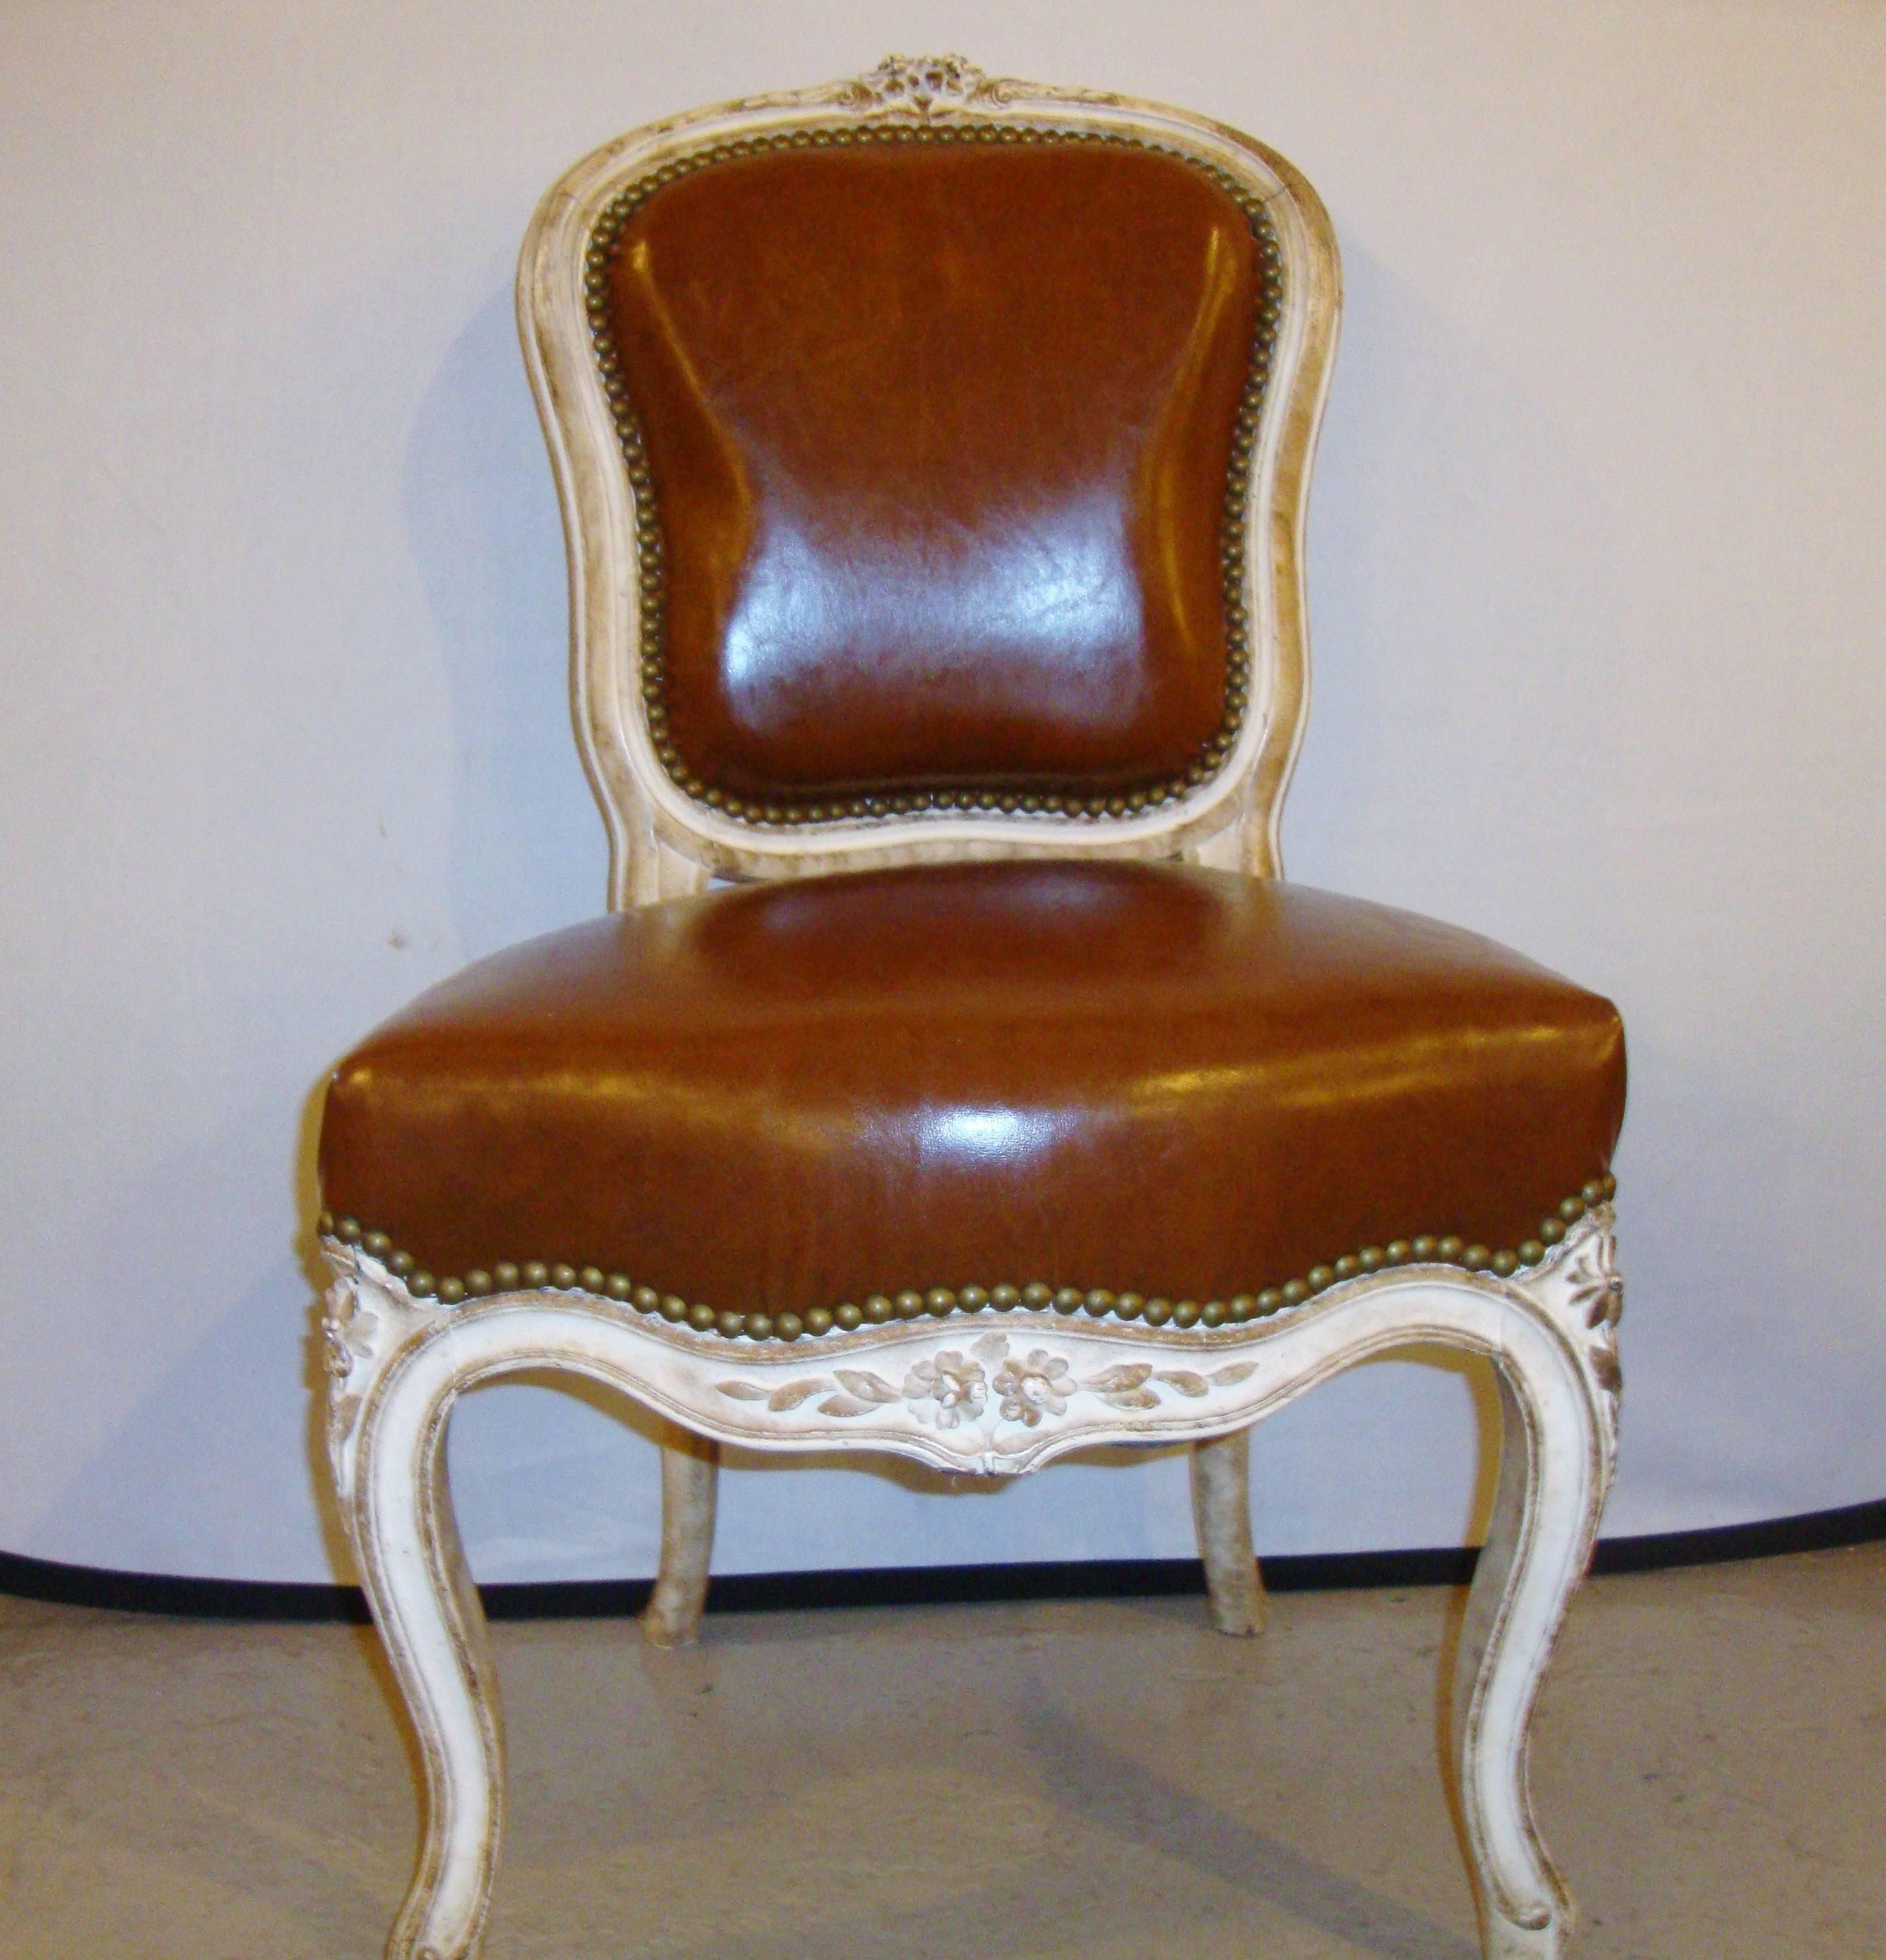 Diminutive leather and painted side chair by Jansen. This finely painted chairs is most likely made especially for a child of a wealthy family or as a salesmen model.